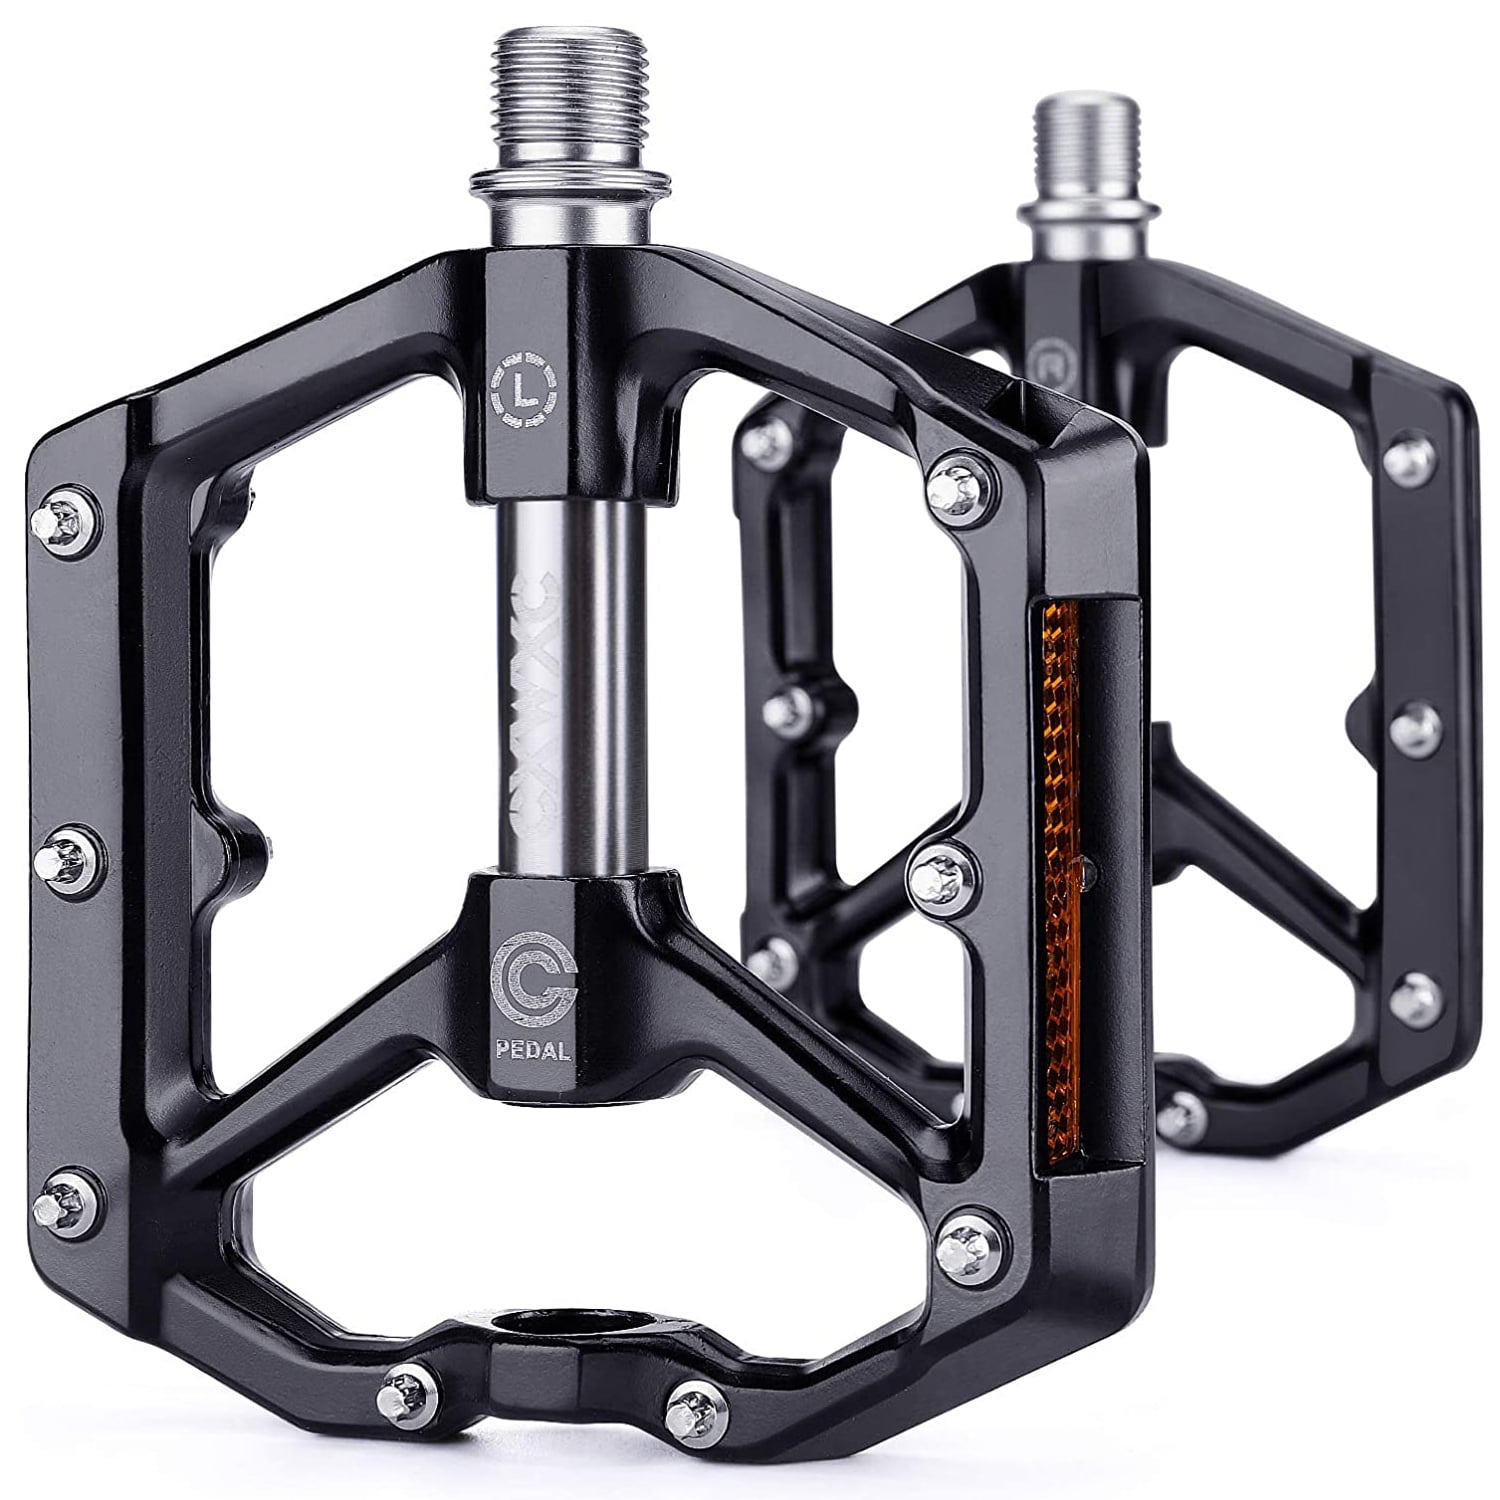 HOTOP Bicycle Pedals Aluminum Alloy Non-Slip Bicycle Pedals Bicycle Platform Pedals Mountain Road Bike Pedals 9/16 Inch Boron Steel Spindle for BMX/MTB